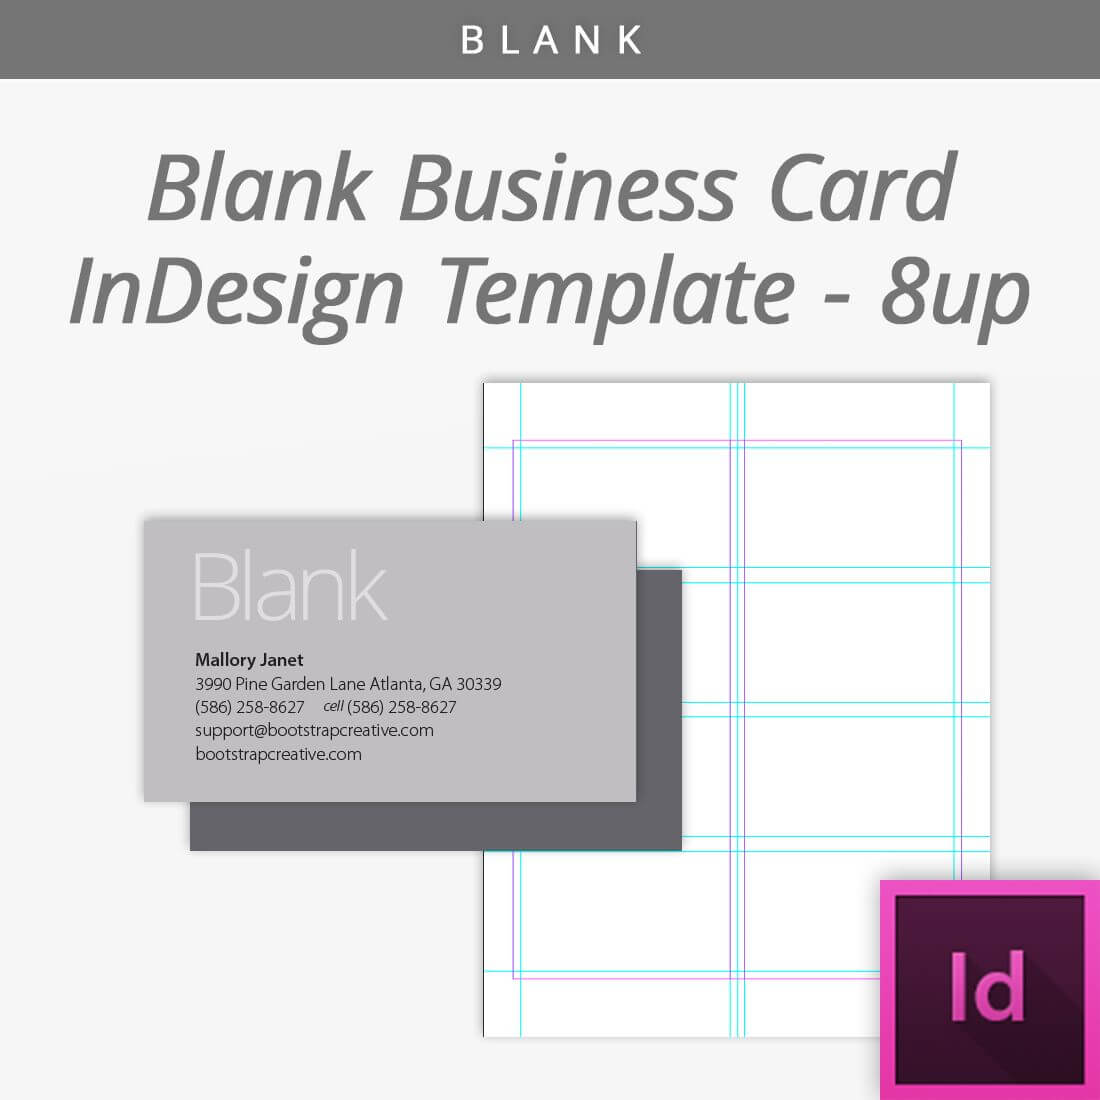 Bootstrap Creative | Blank Business Cards, Indesign In Blank Business Card Template Download